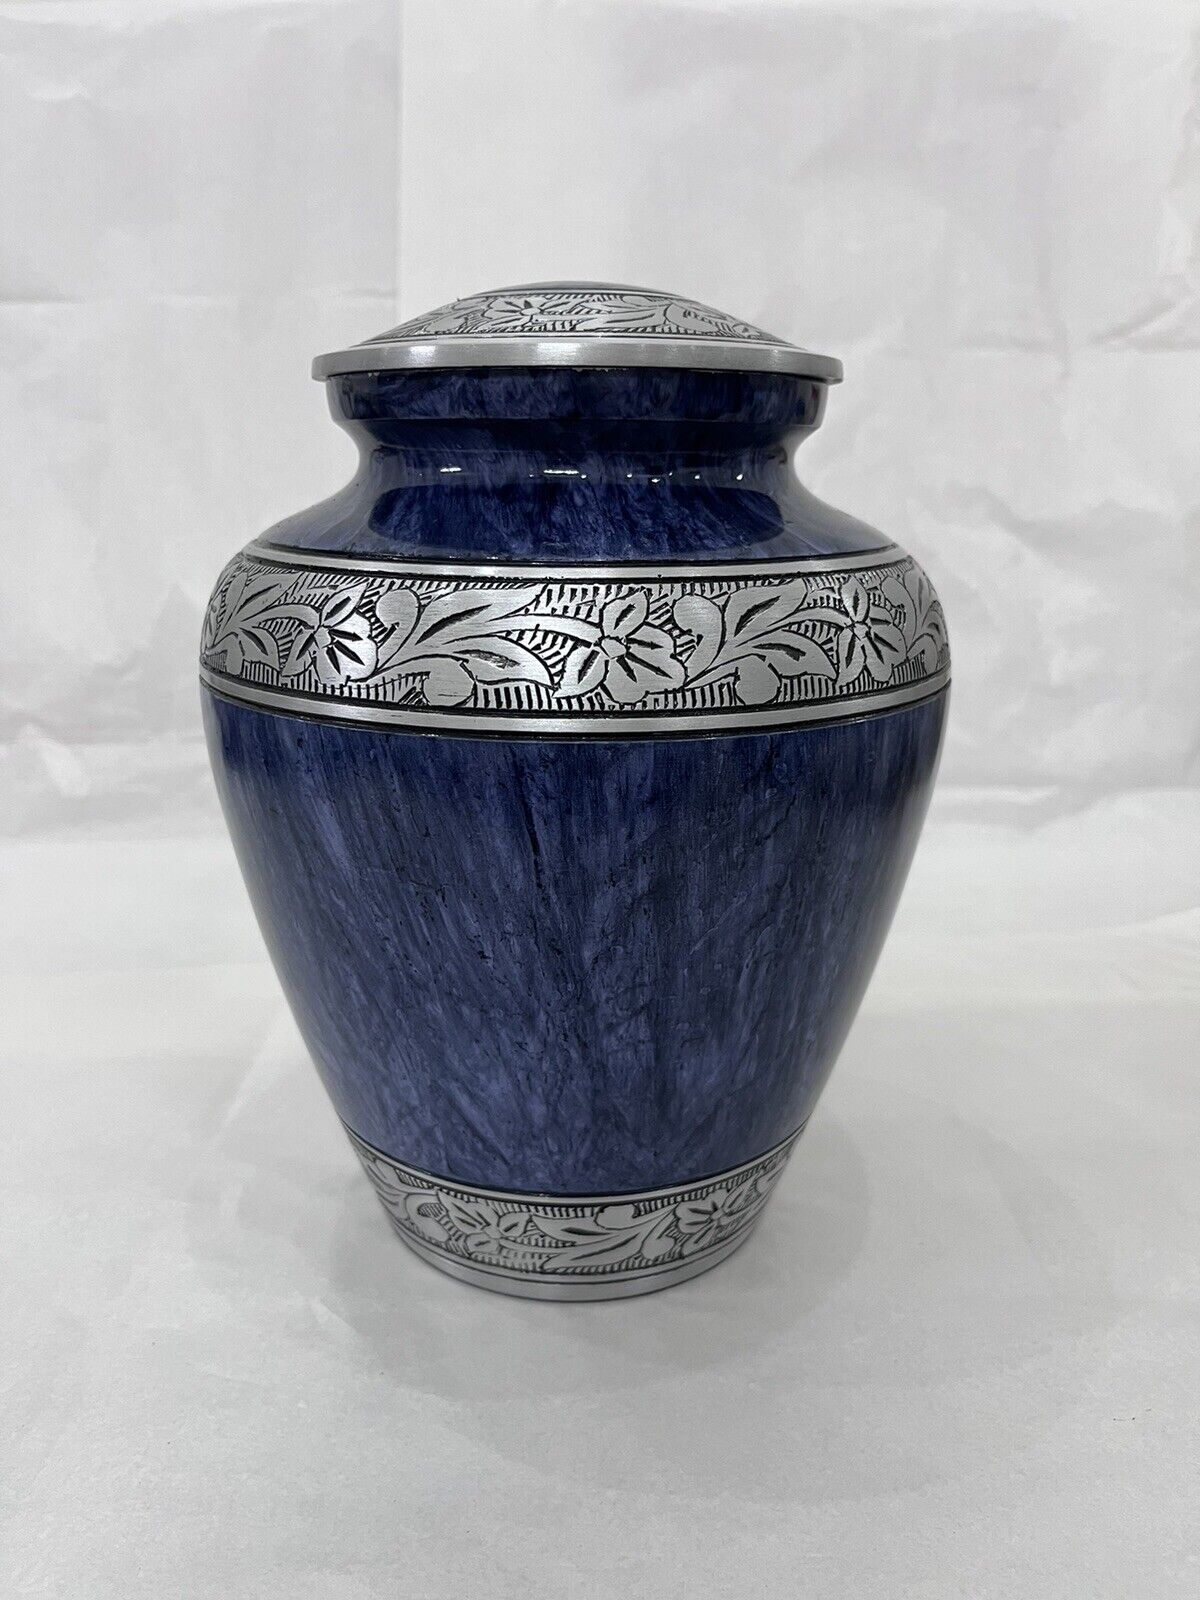 Cremation Urn for Adult Human Ashes Large Handcrafted Funeral Gray Design 10in